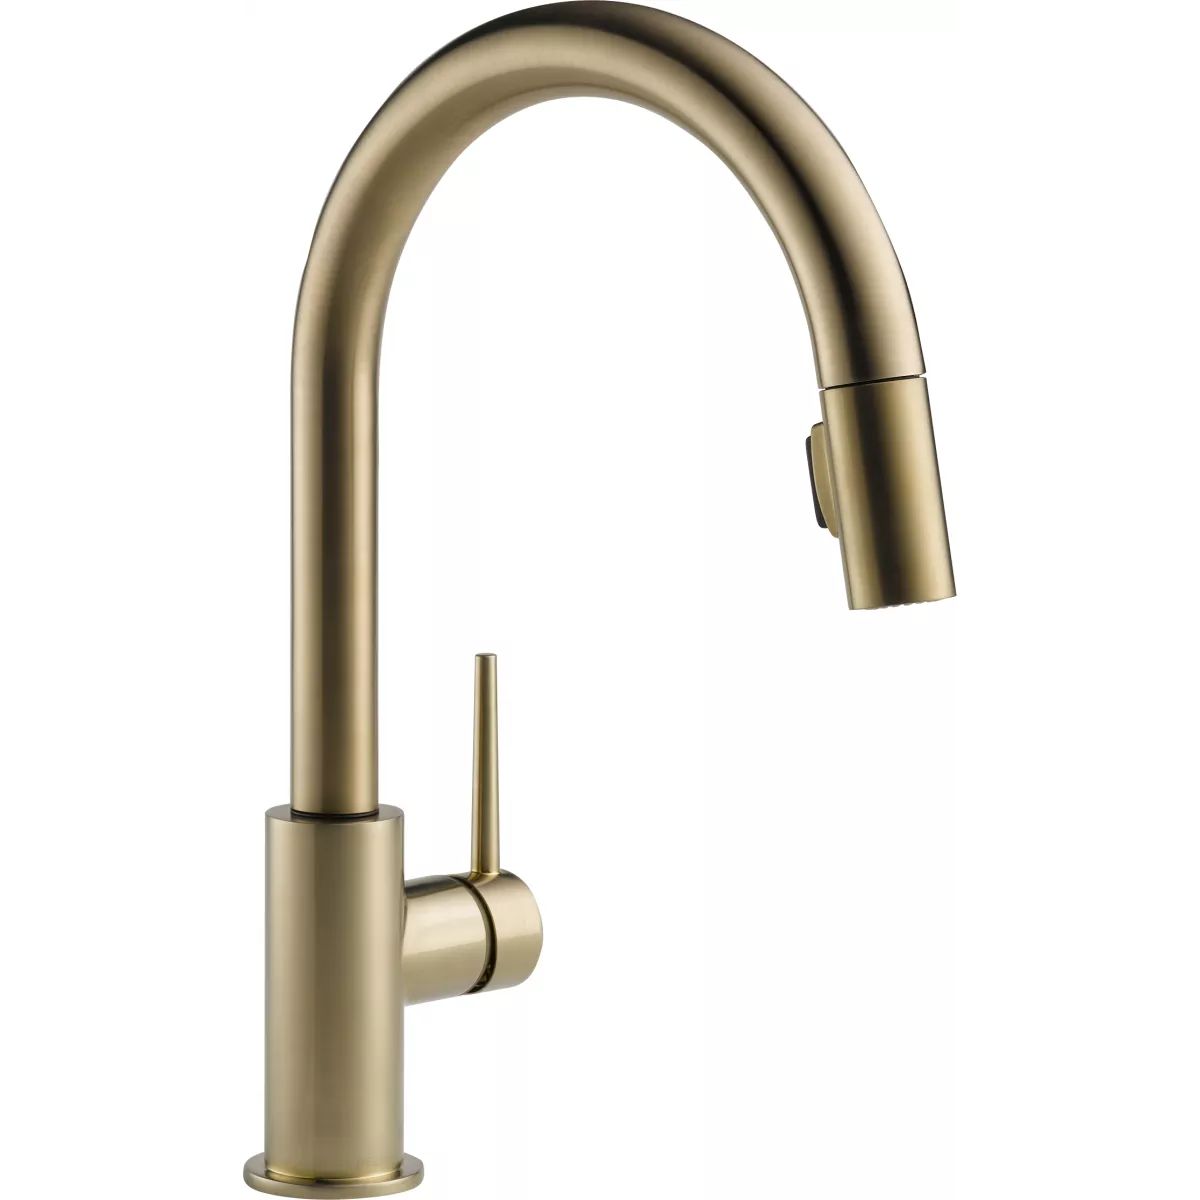 Trinsic Pull-Down Kitchen Faucet with Magnetic Docking Spray Head - Includes Lifetime Warranty | Build.com, Inc.